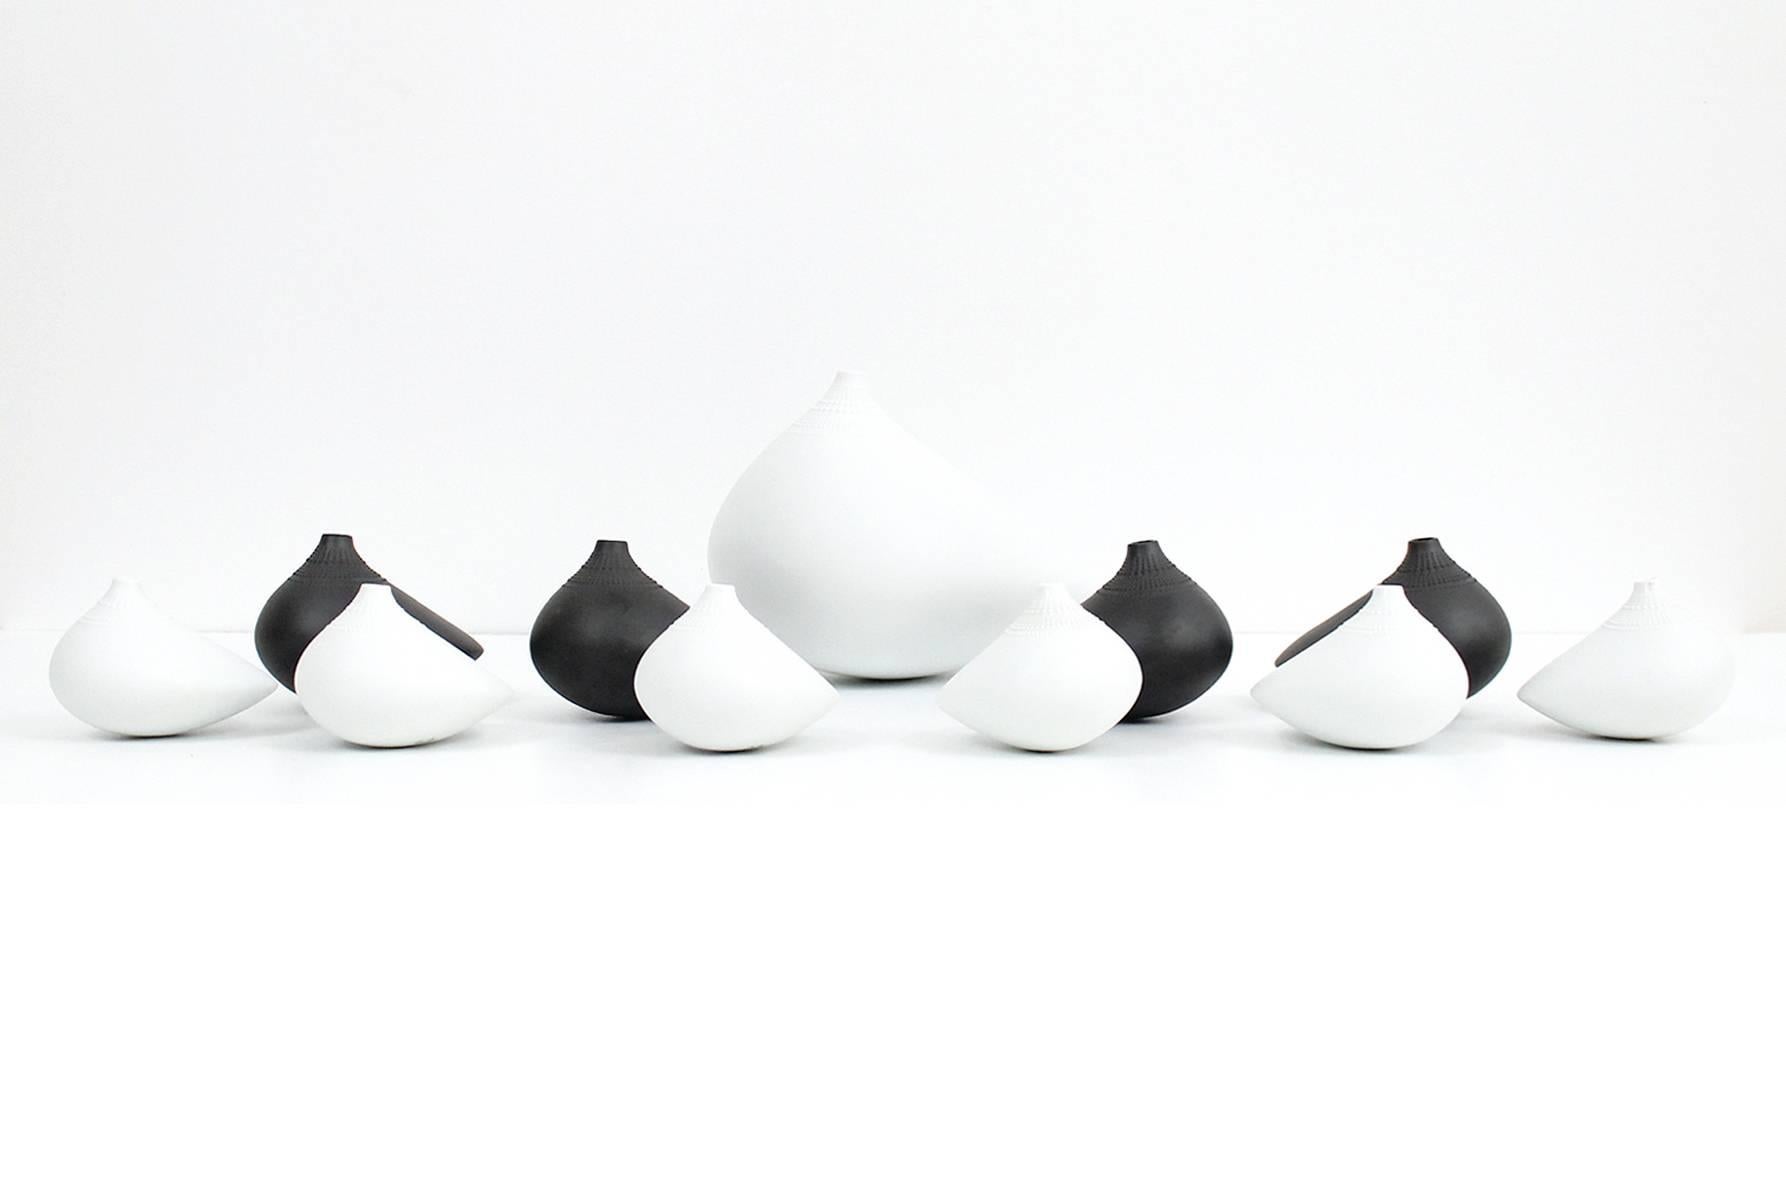 Tapio Wirkkala designed porcelain vase collection.  These 11 vases are from the 